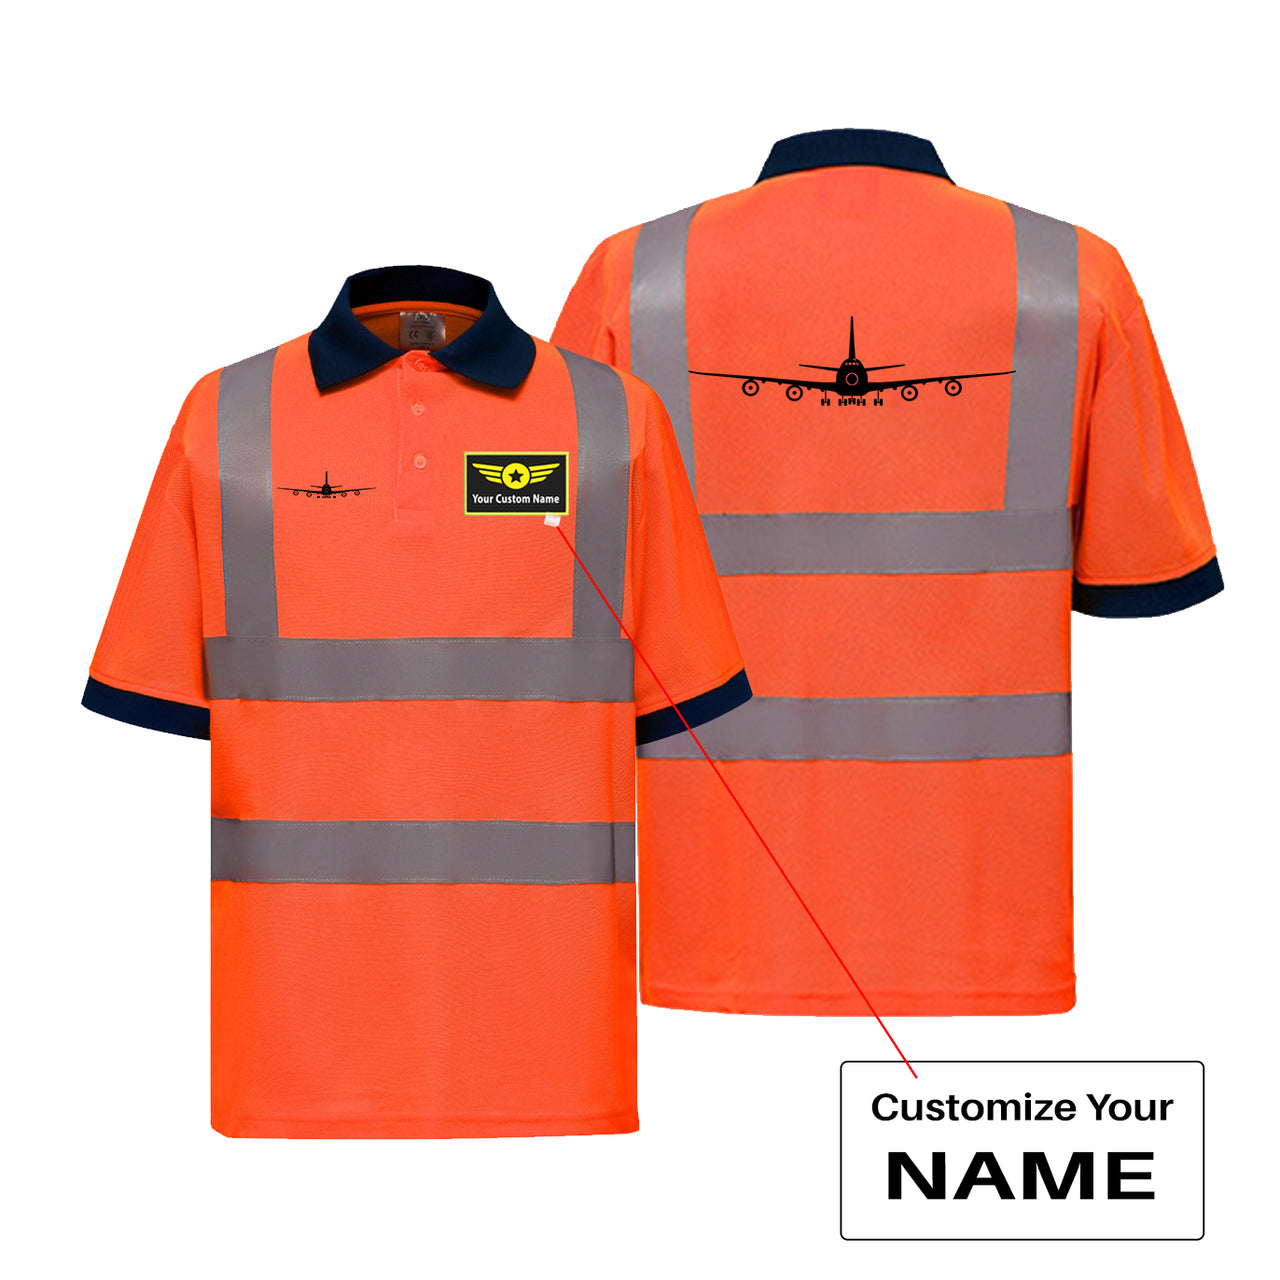 Boeing 747 Silhouette Designed Reflective Polo T-Shirts